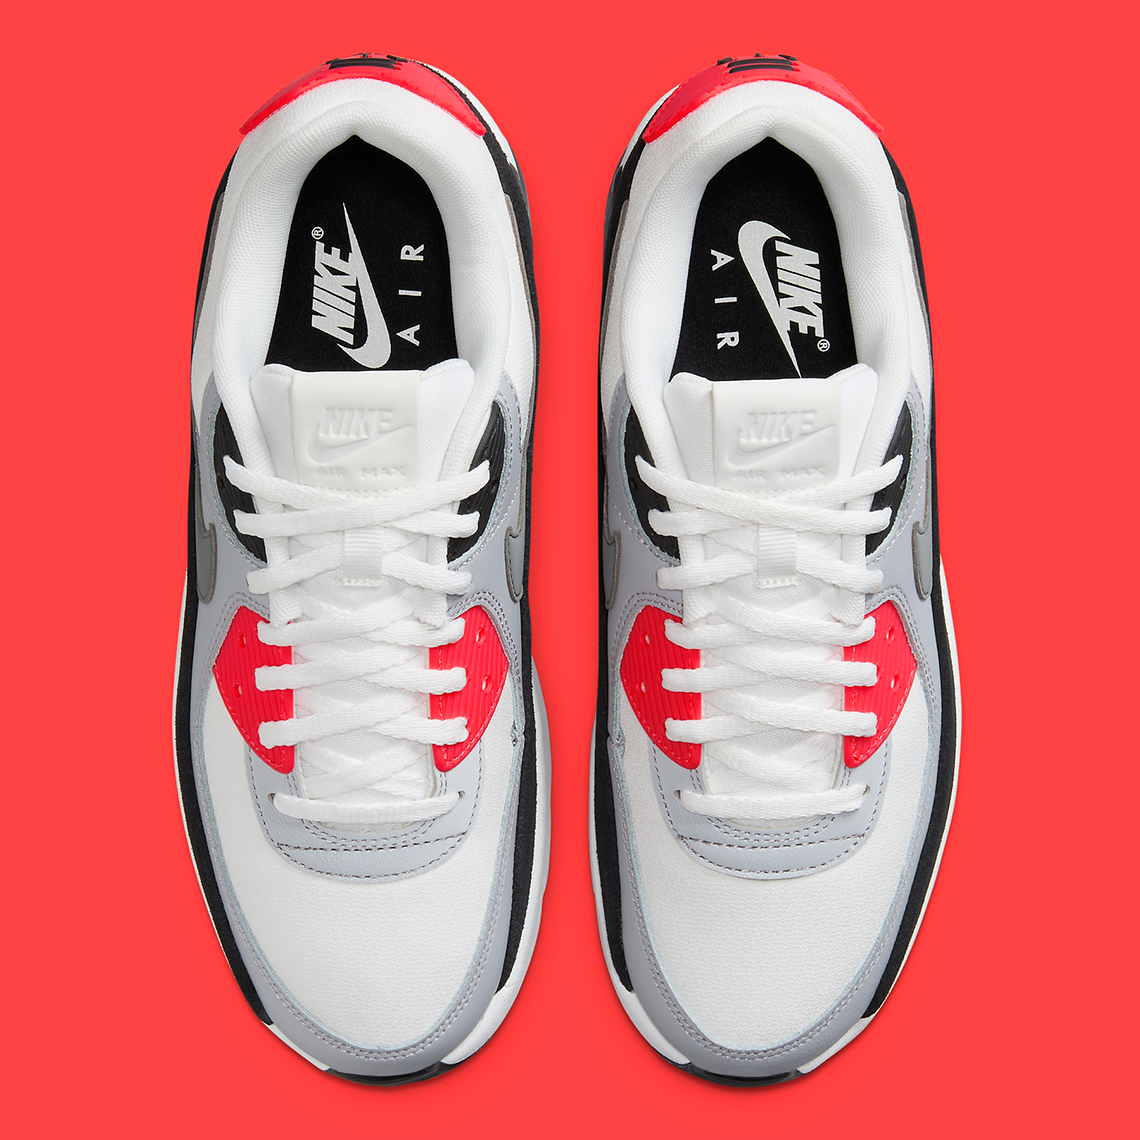 Nike Air Max 90 Double Stacked Infrared Fd4328 101 7